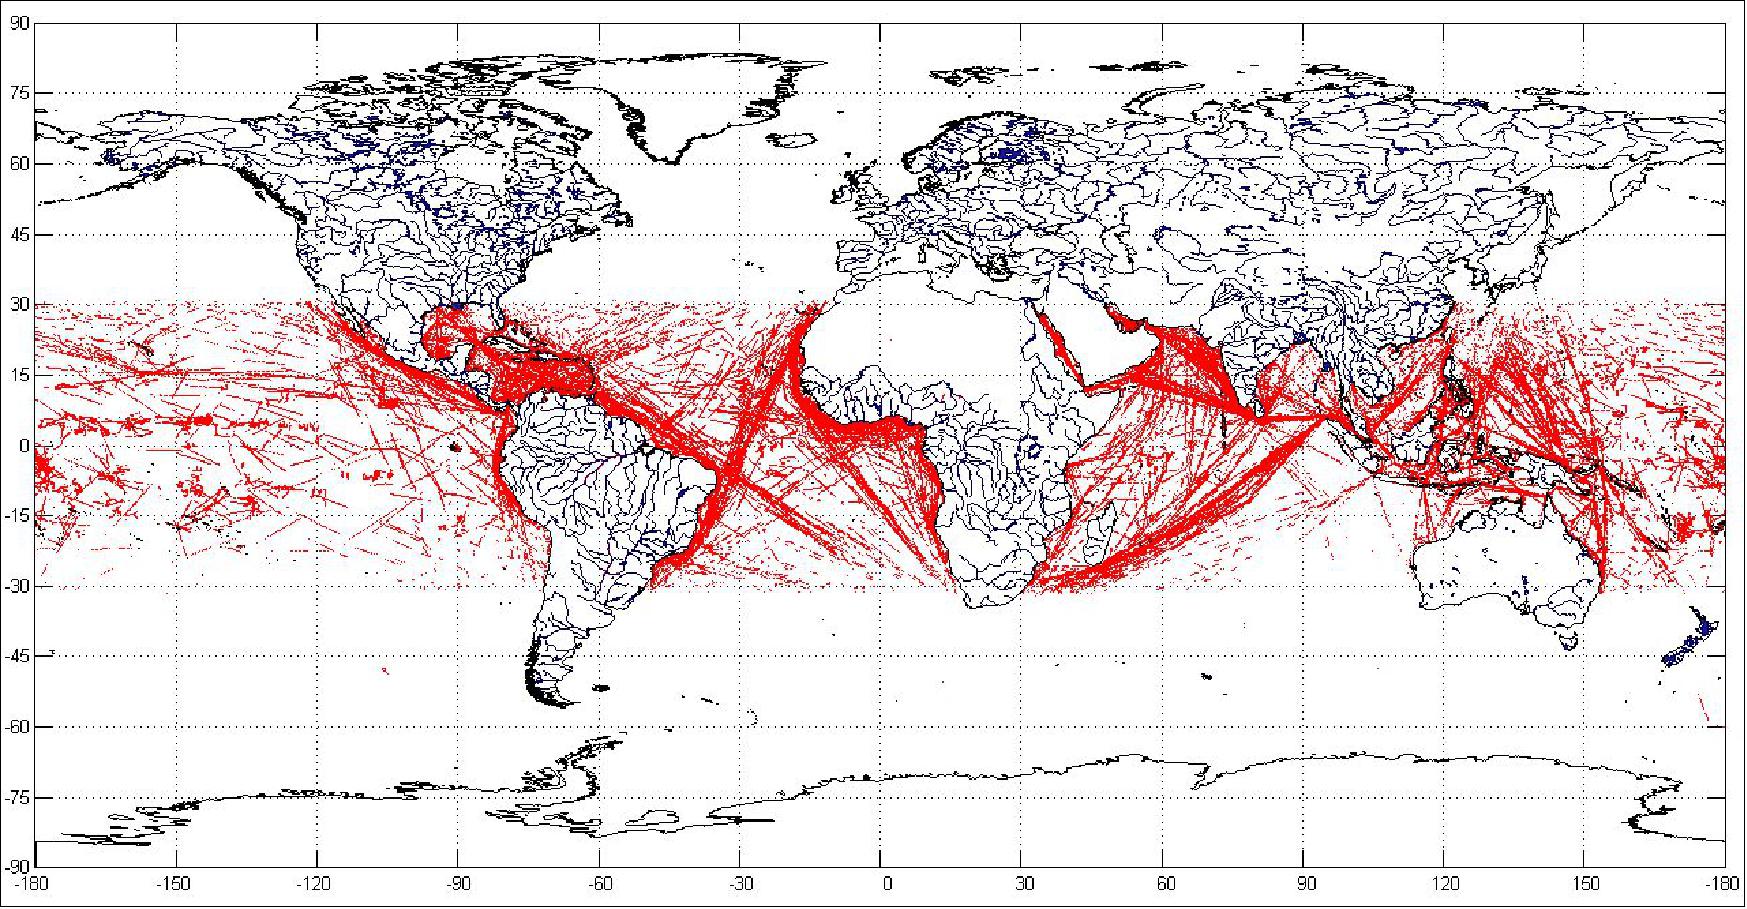 Figure 6: EV-9 ship detection over 2 days in March 2016 (image credit: exactEarth)